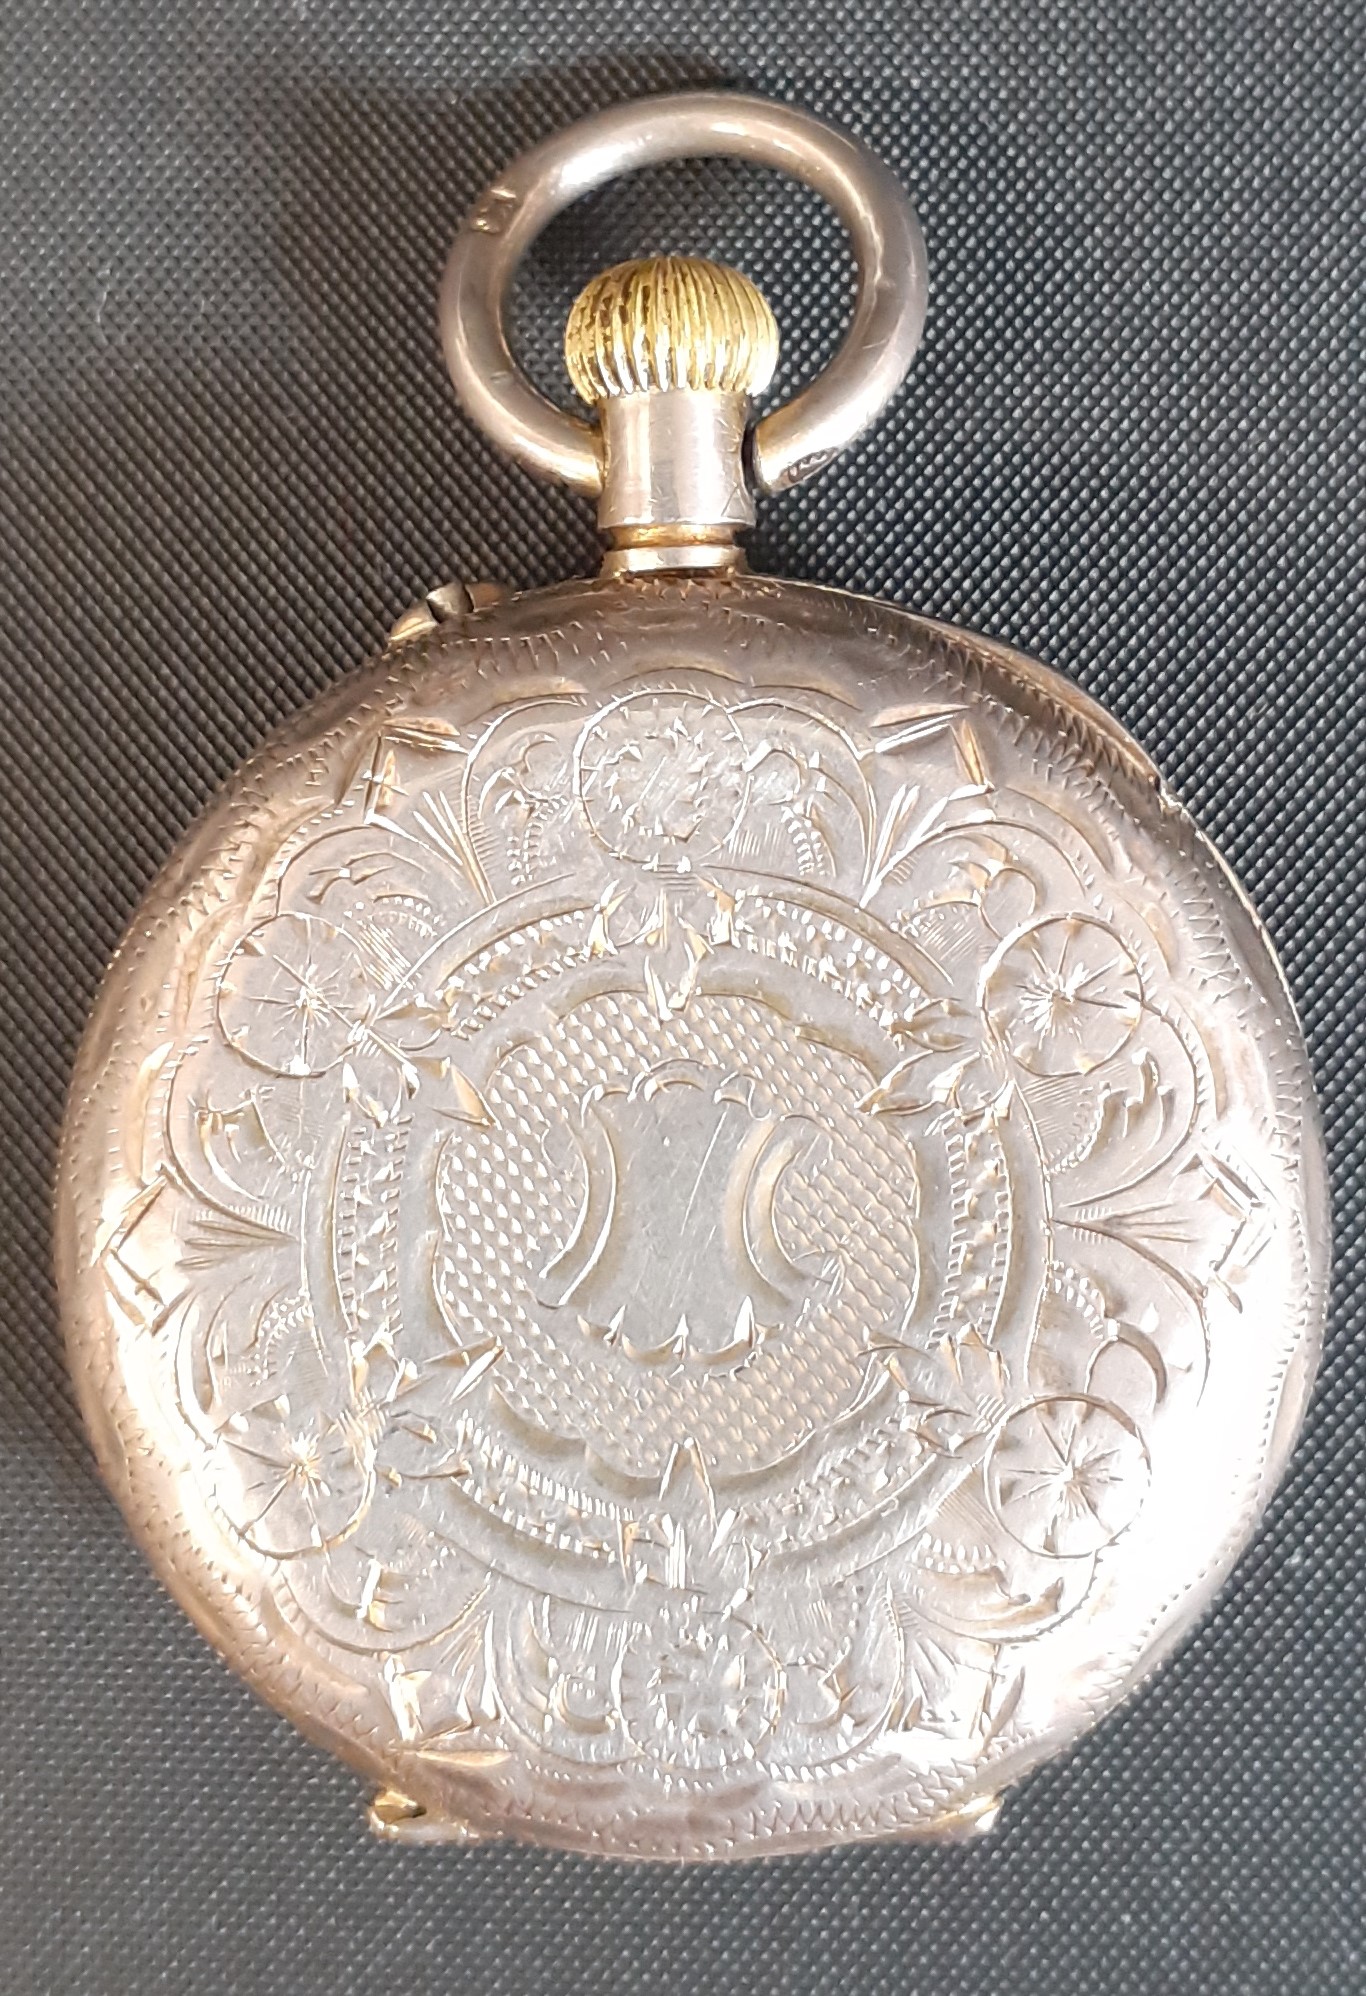 Continental silver gilt top wind fob watch marked 935 with engine turned case, heart shaped - Image 2 of 3